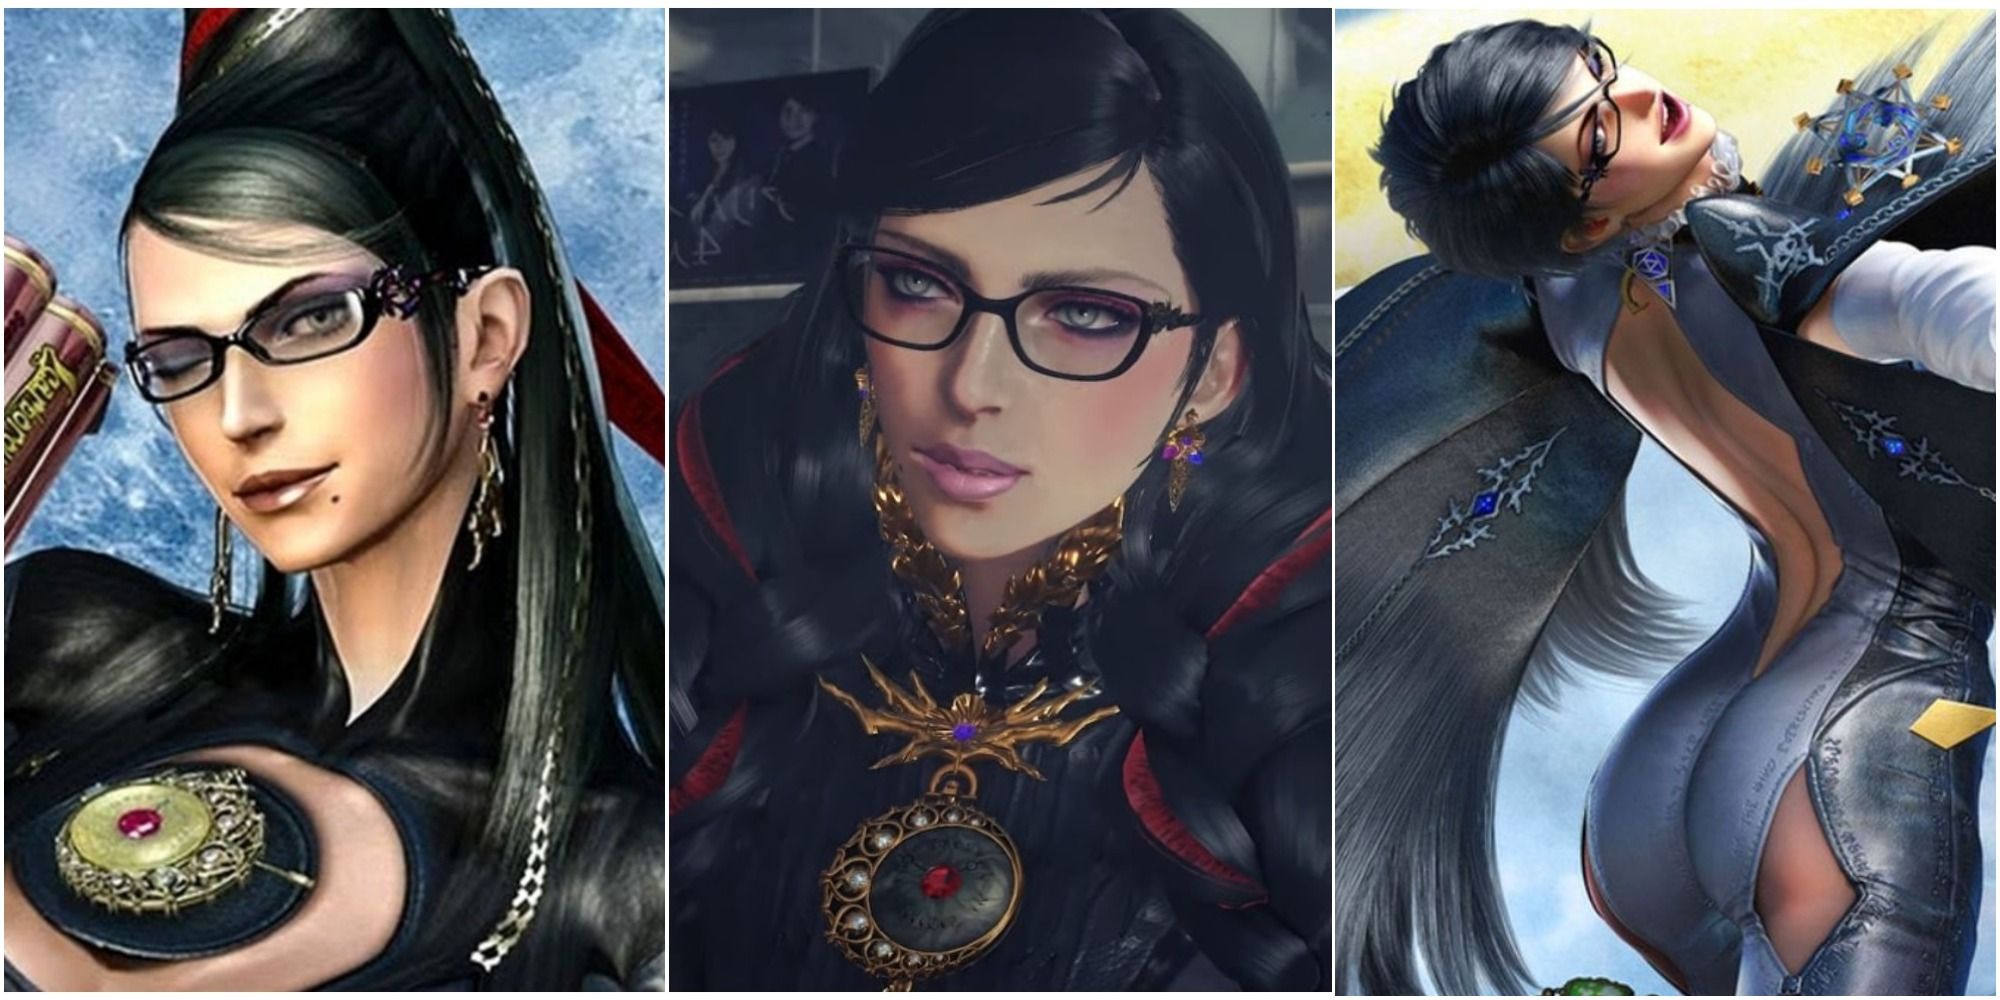 Video: Bayonetta 2 Reveals Exciting New Hairstyle